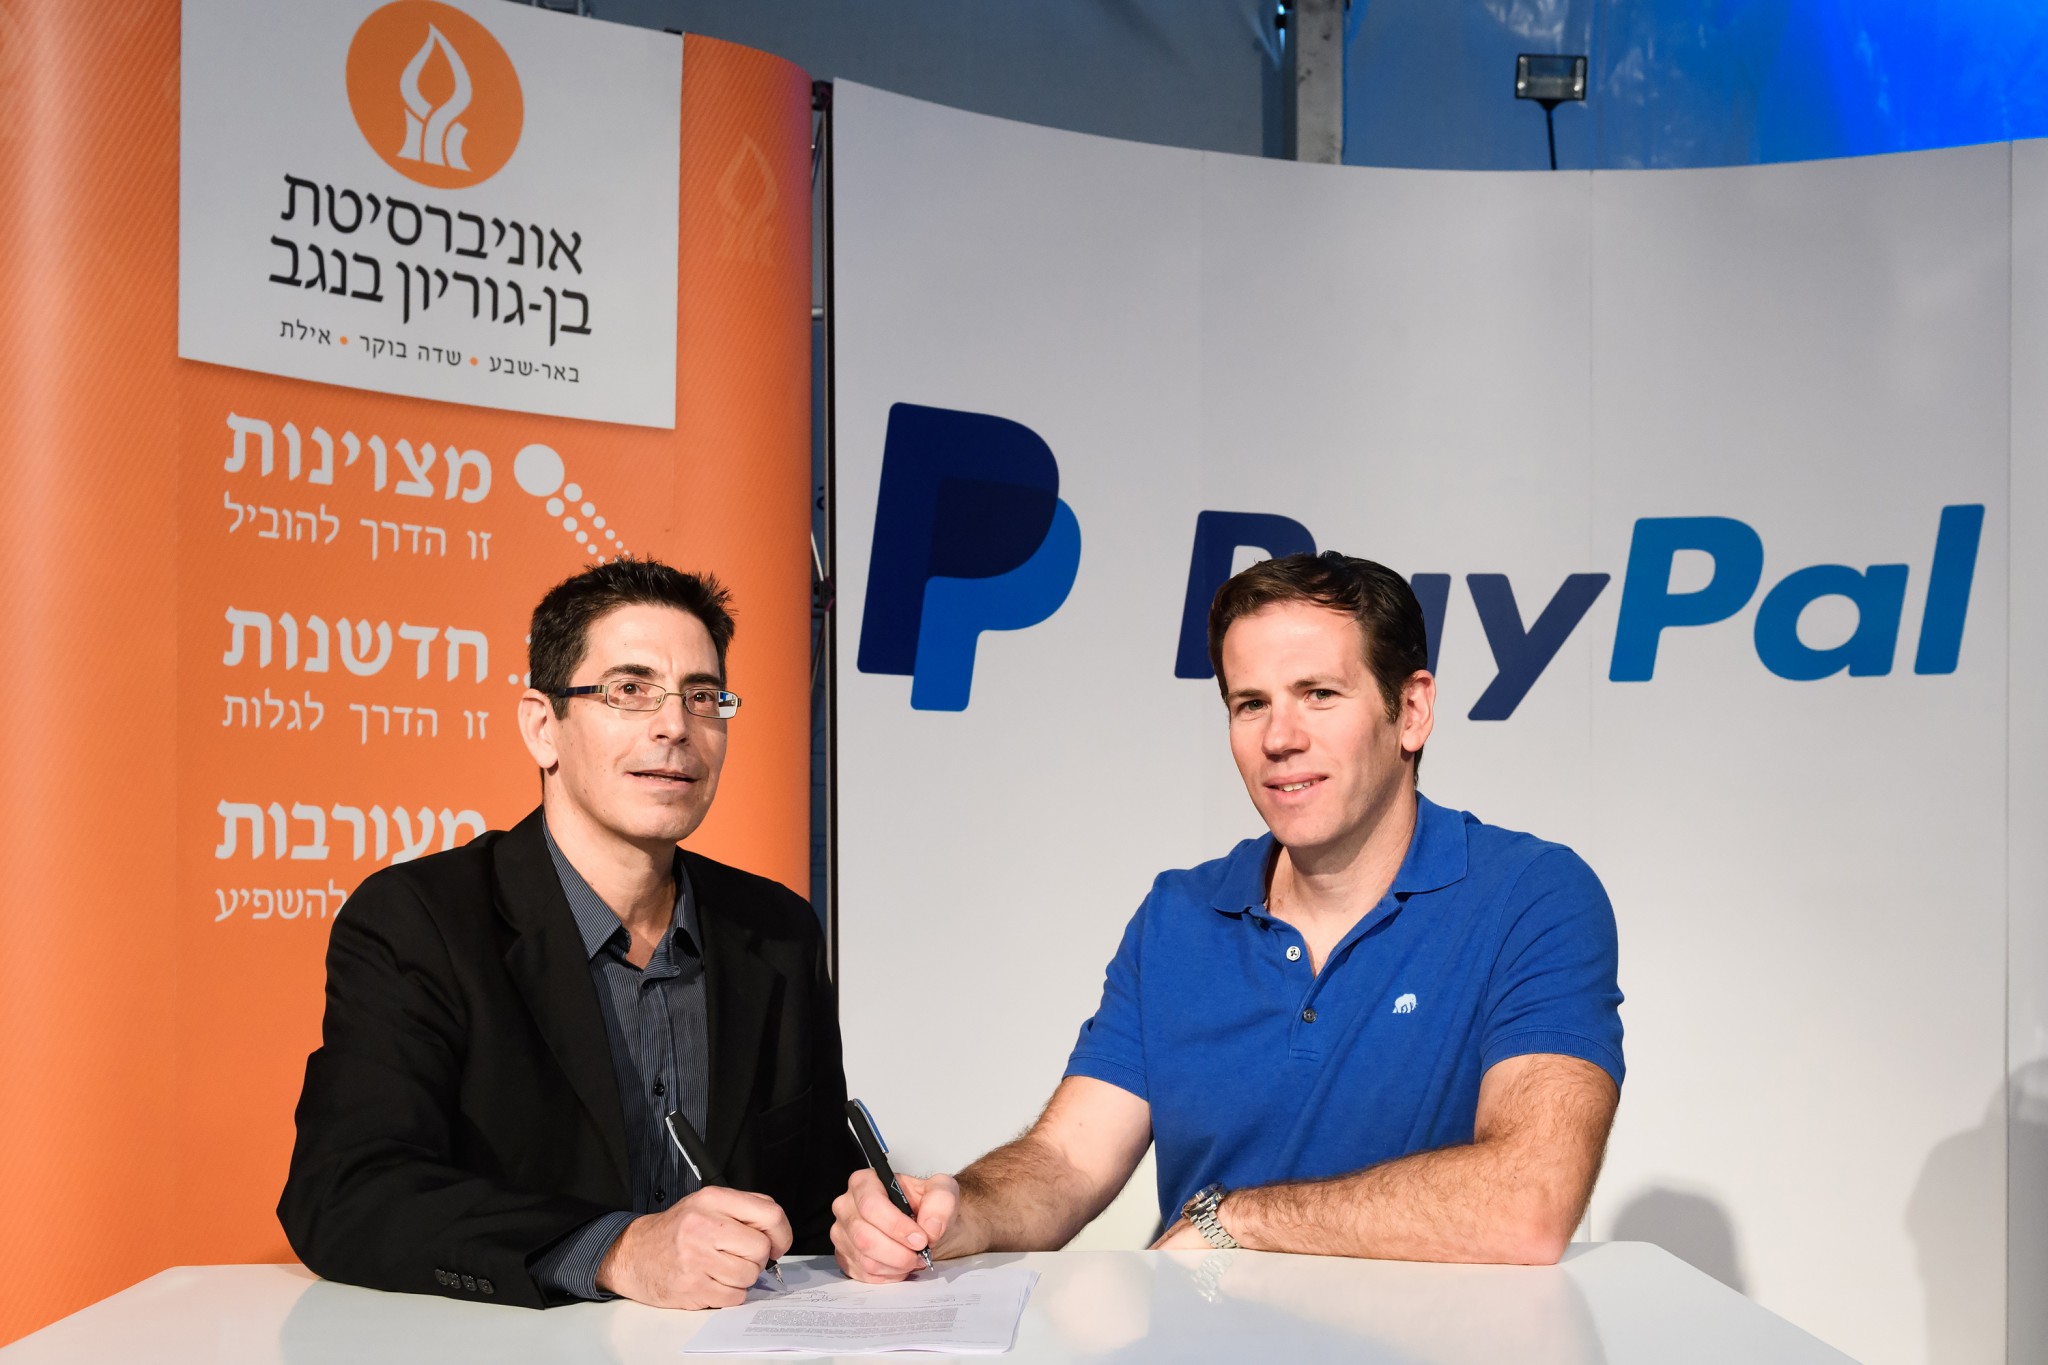 Netta Cohen, BGN Technologies CEO (left), and Matan Parnes, PayPal's General Manager in Israel, sign the agreement at the Nextech Conference at the Gav Yam Negev Advanced Technologies Park in Beersheva. Photo by Dani Machlis/BGU